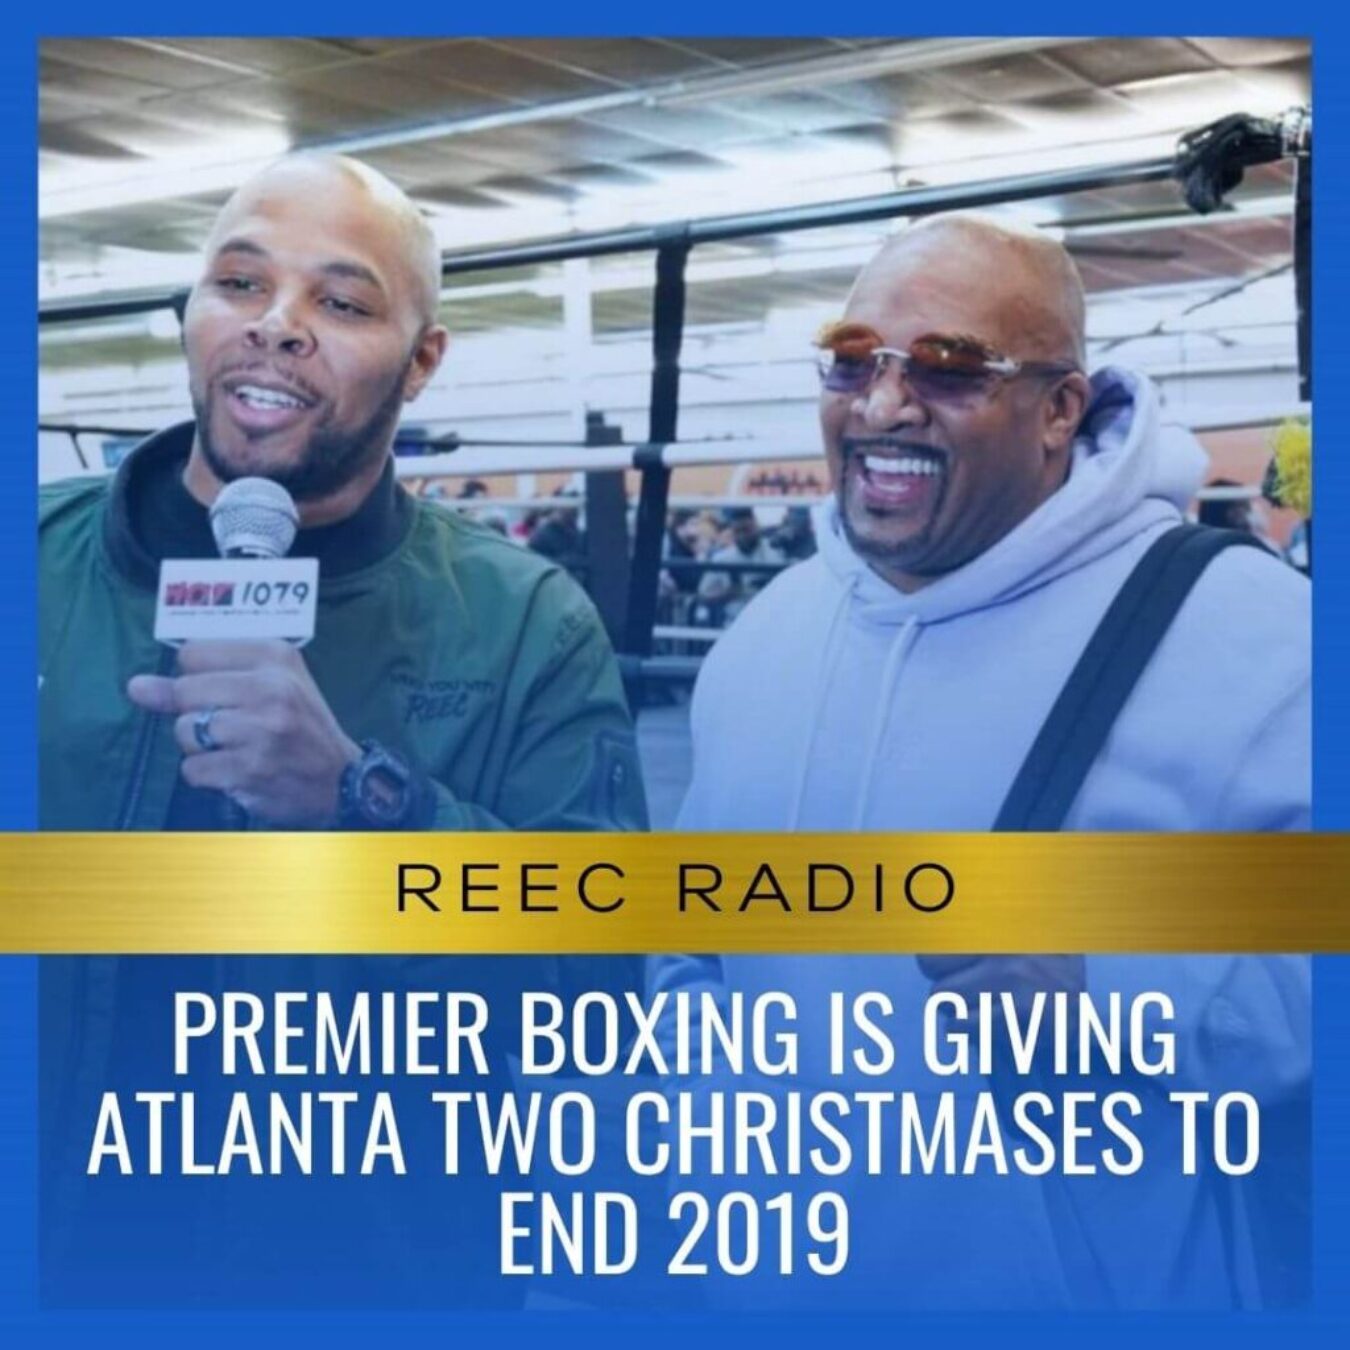 Premier Boxing is giving Atlanta two christmases to end 2019